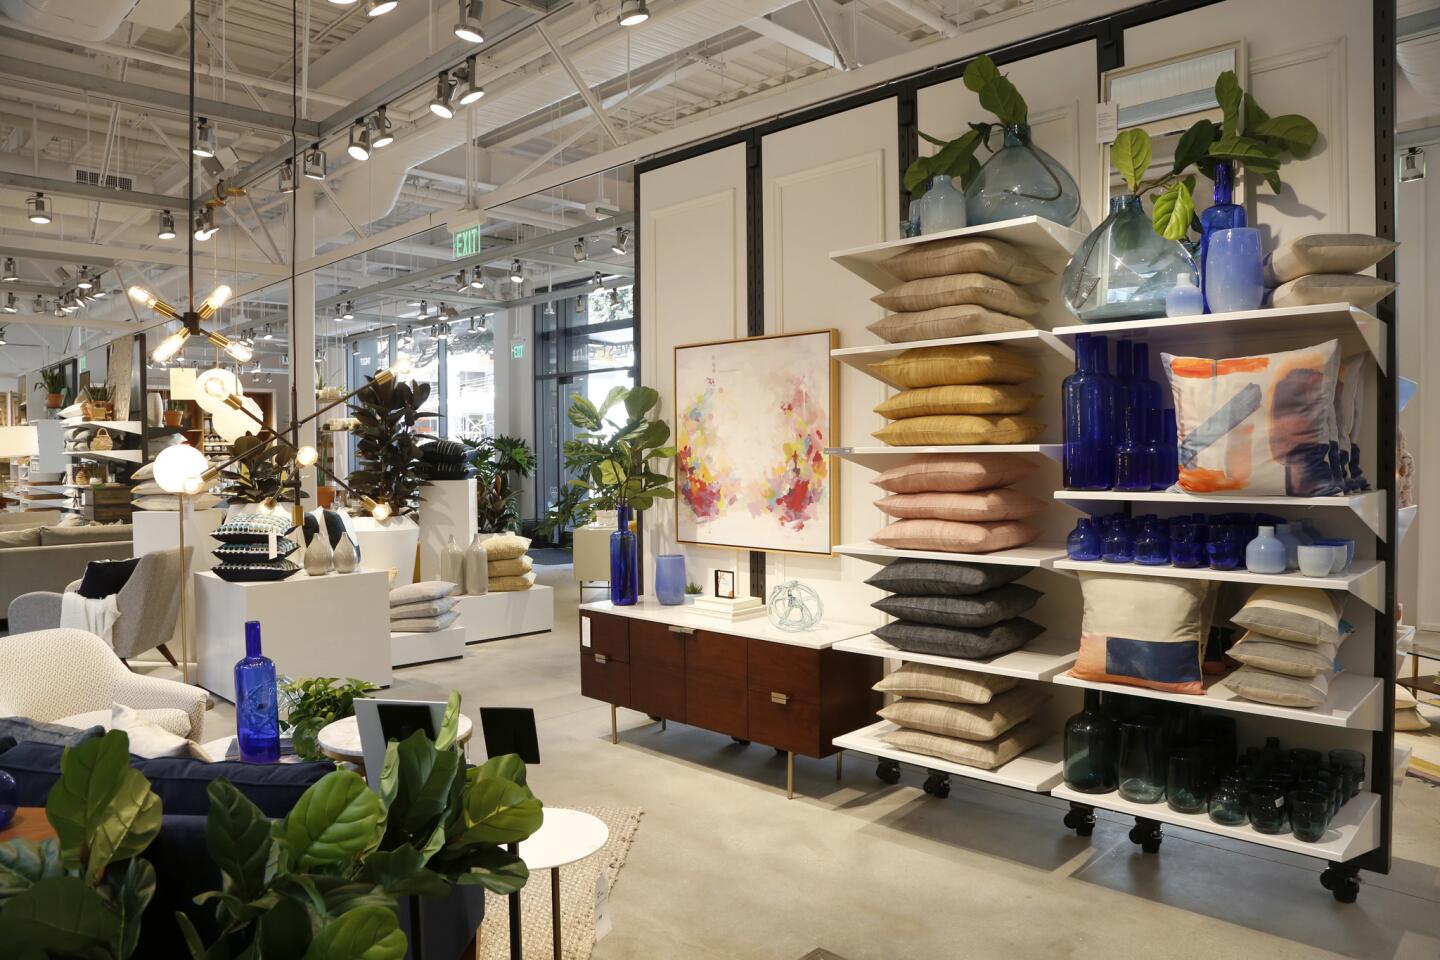 West Elm Santa Monica debuts its new concept store, featuring 24,000 square feet of space.